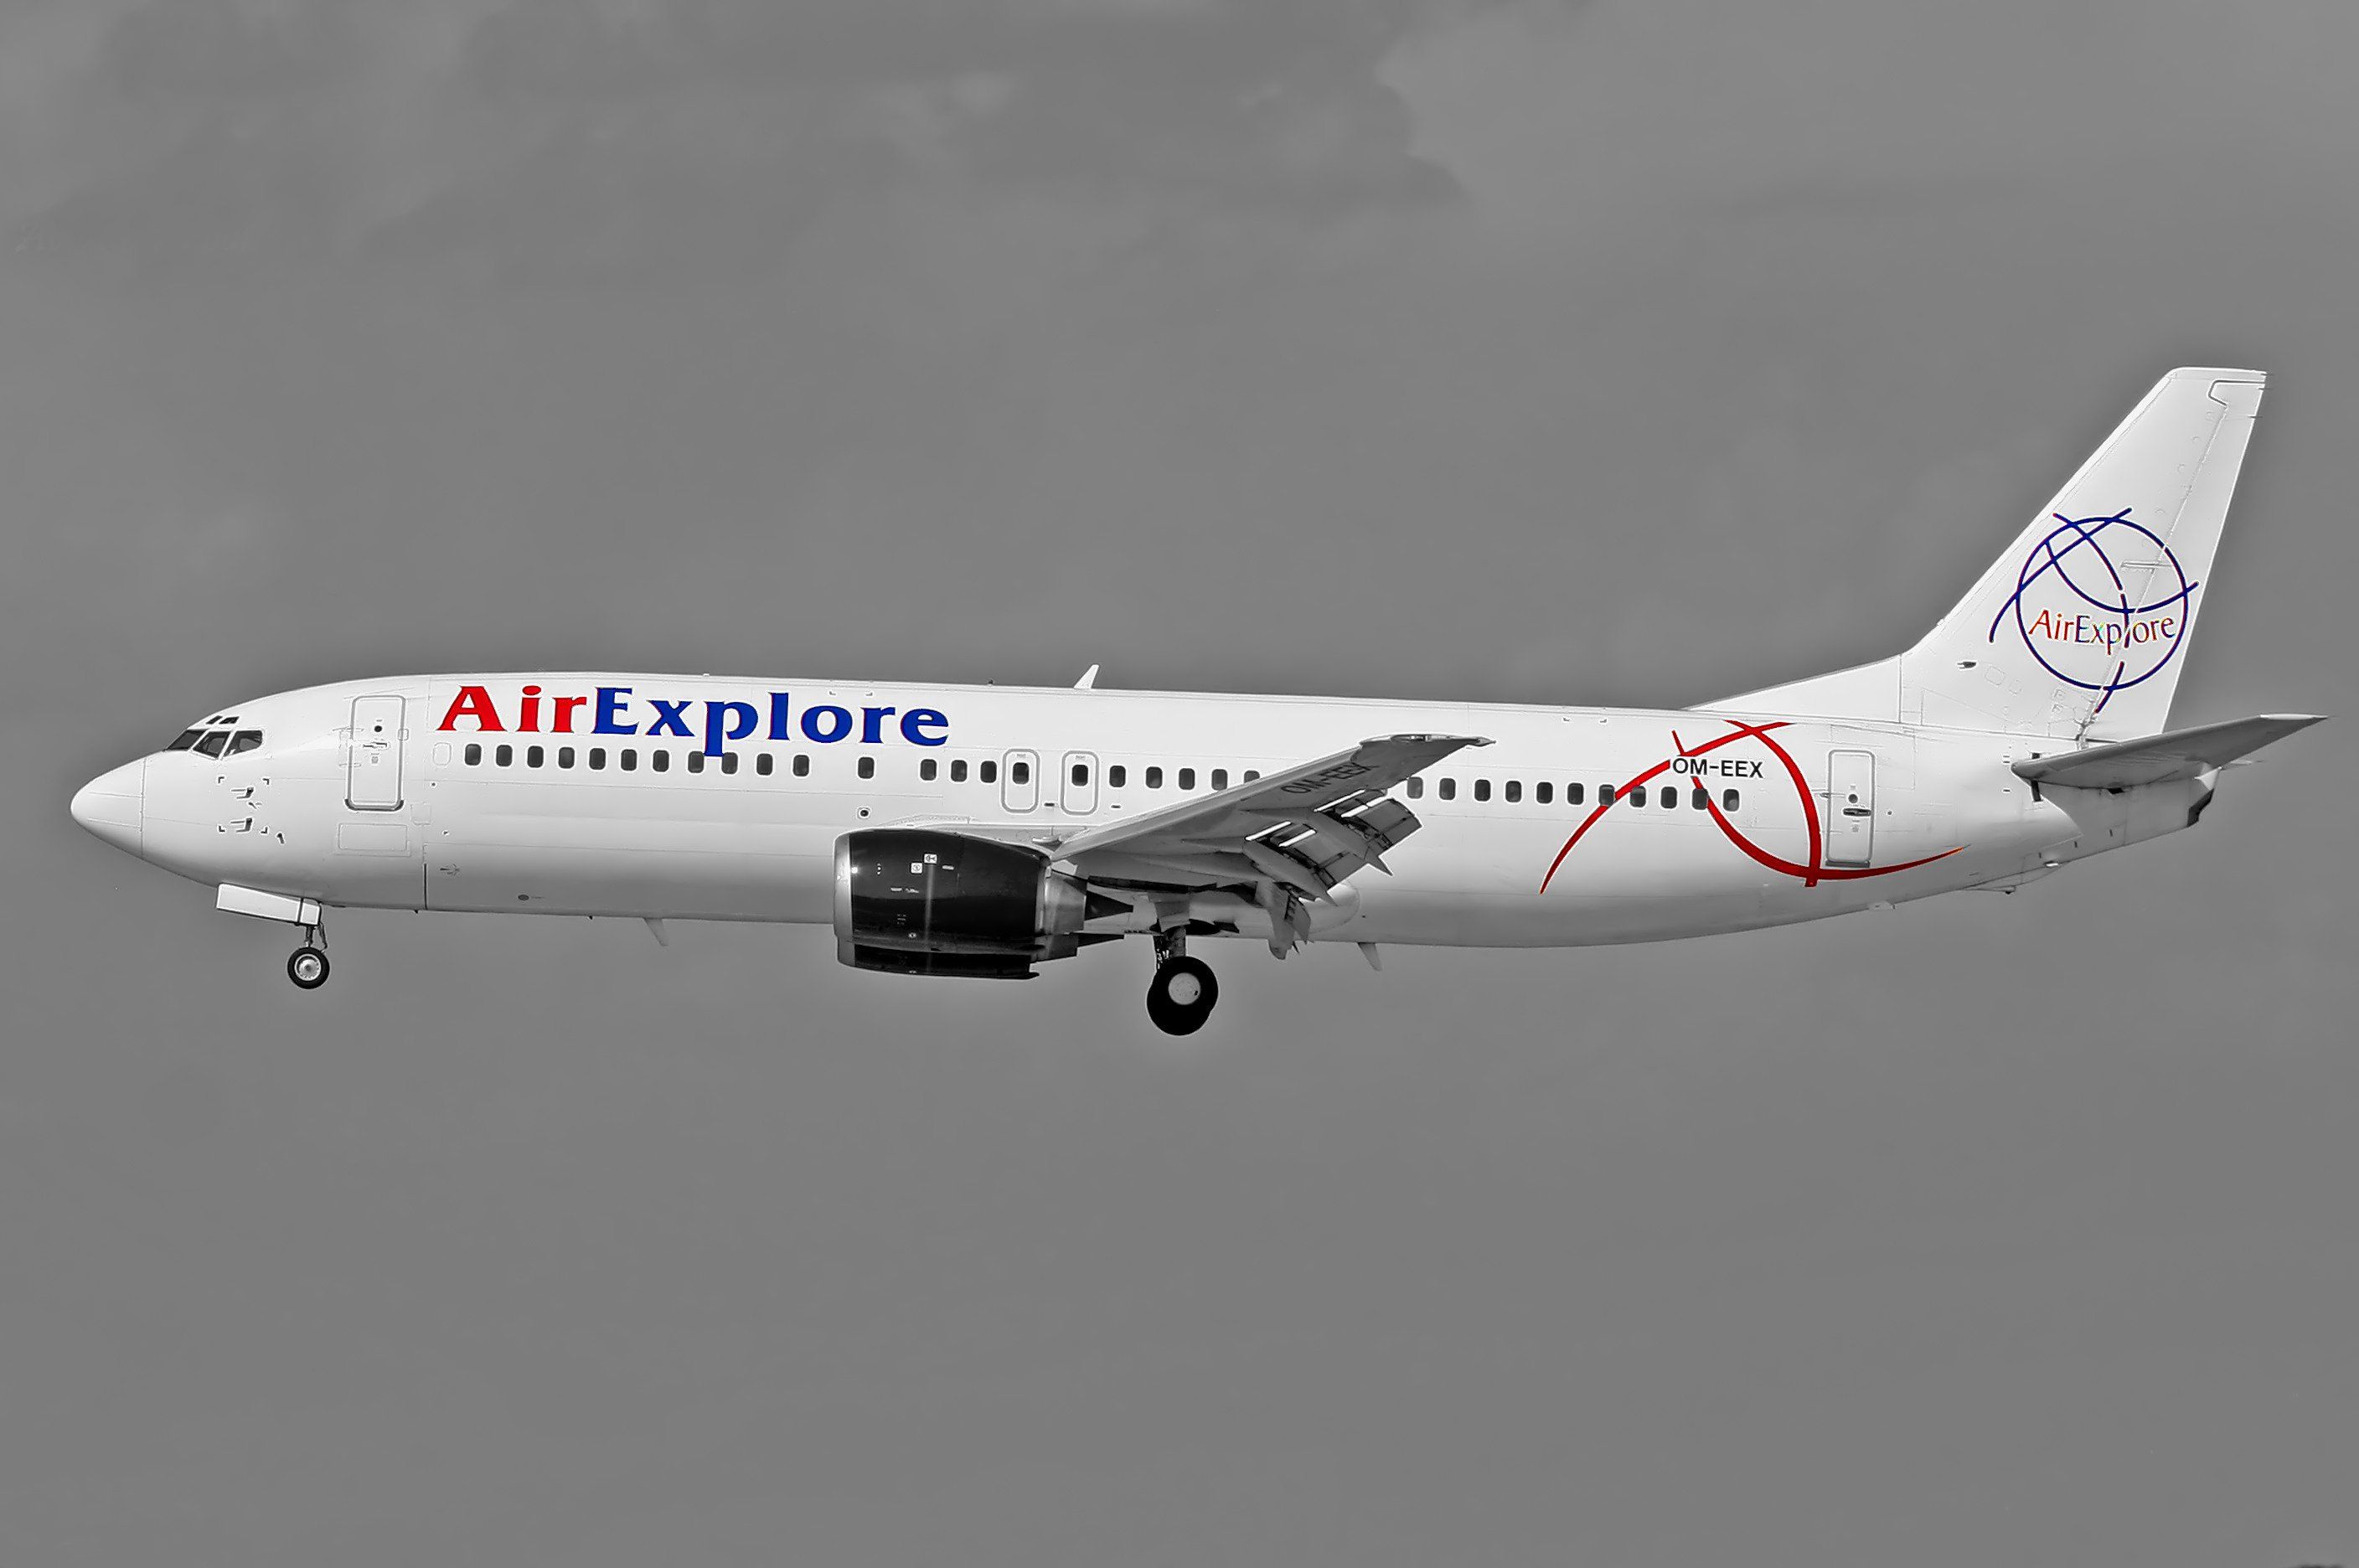 An AirExplore Boeing 737